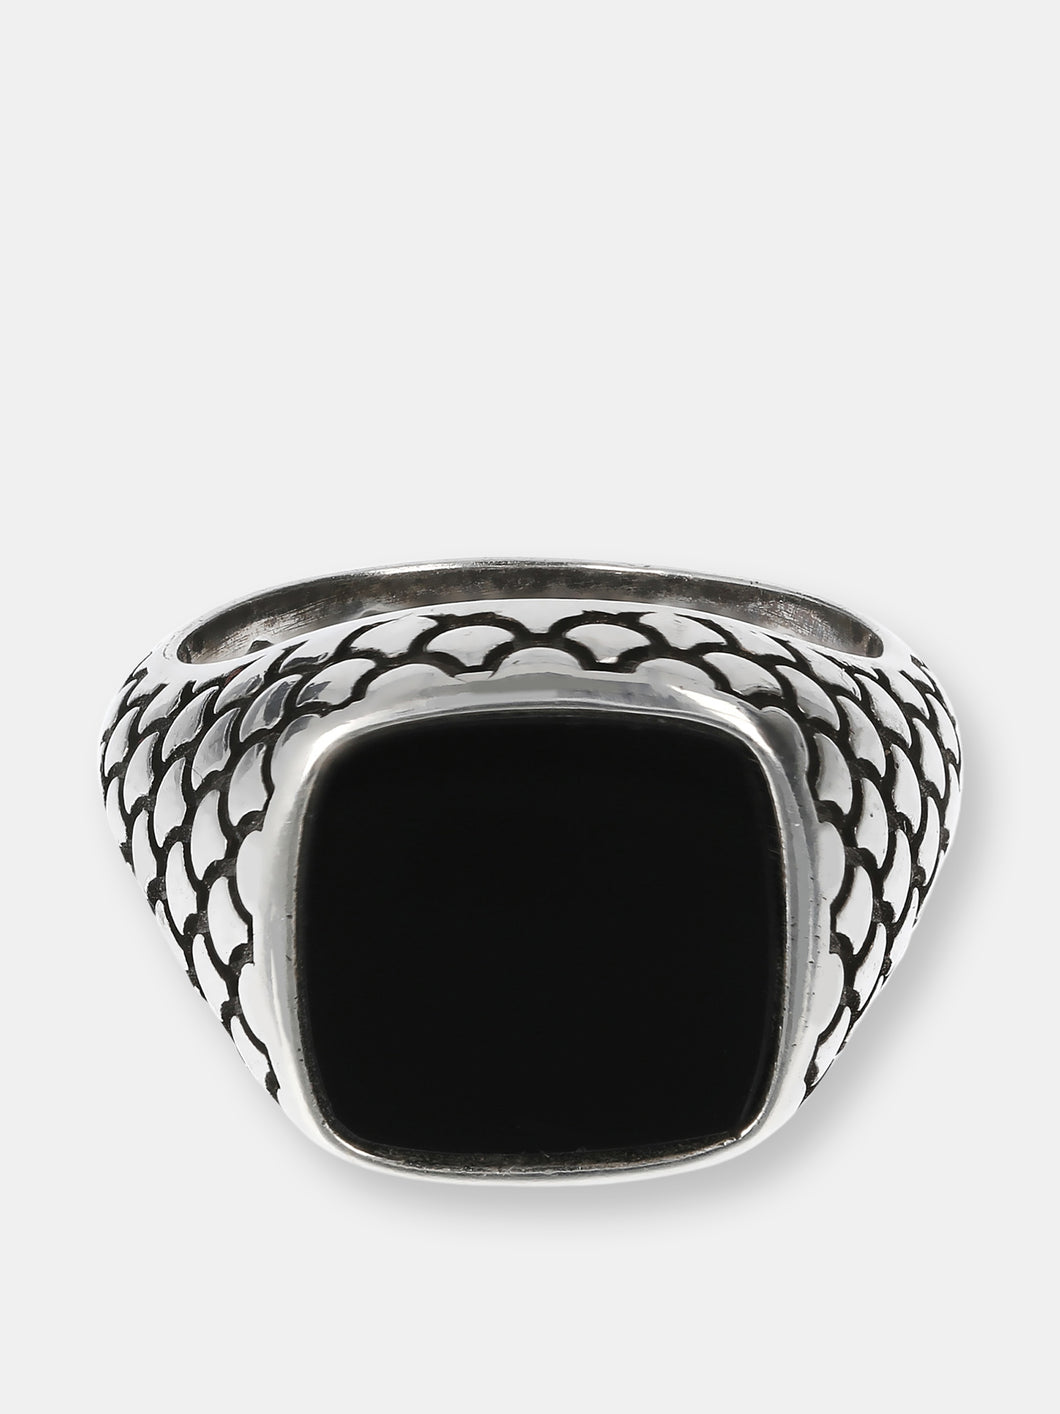 Band Ring With Mermaid Texture - Black Onyx